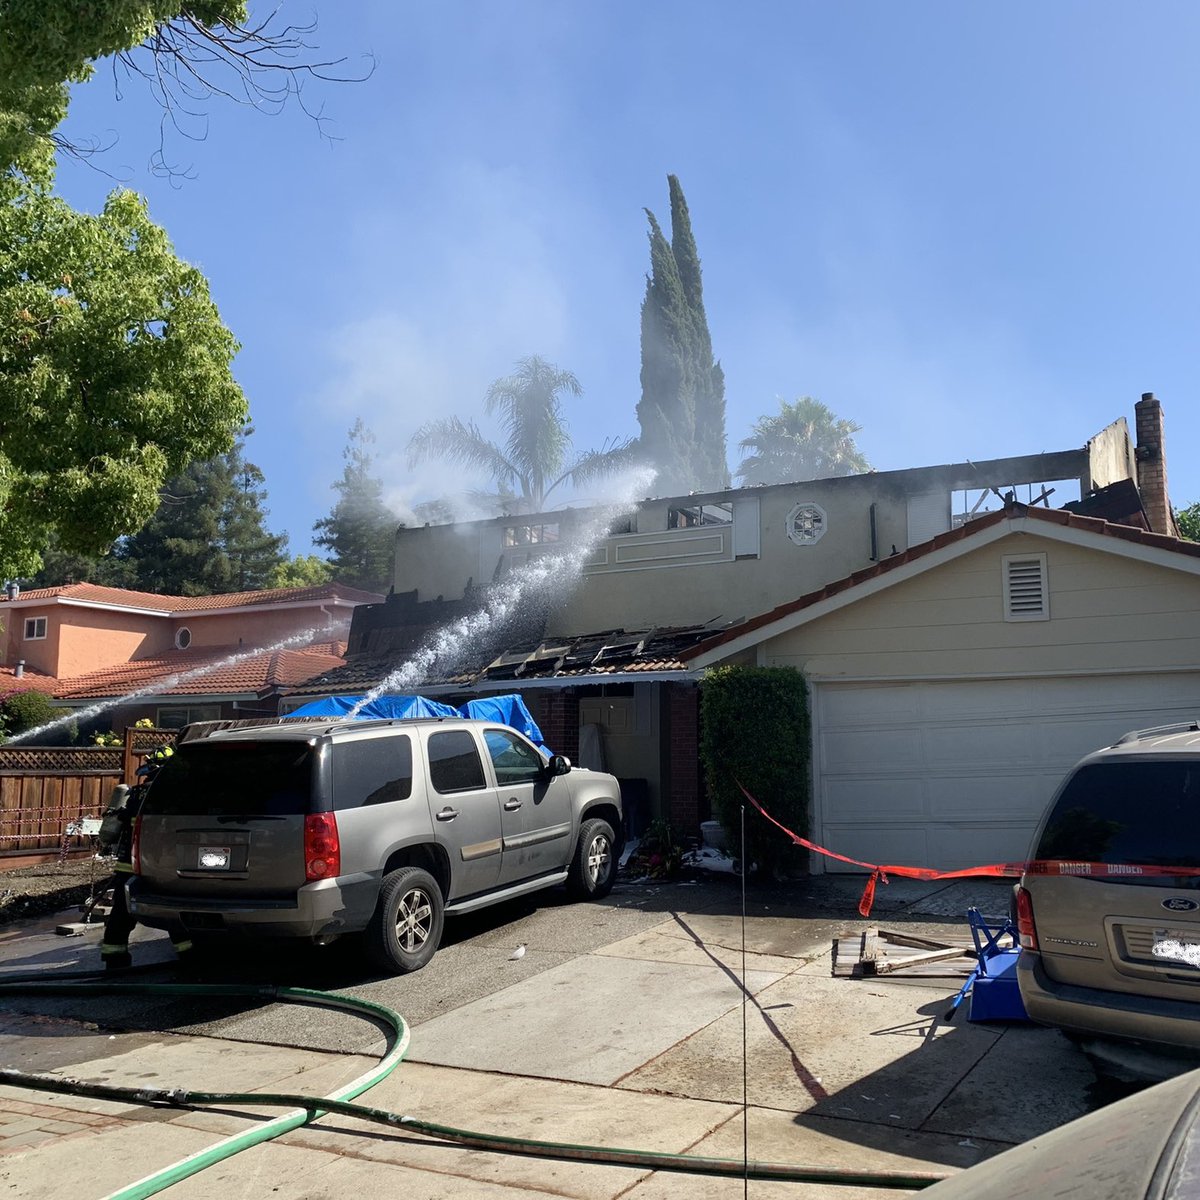 SJFD crews are completing a second-alarm assignment at a residential structure on the 4900 block of Narvaez Ave. One individual treated for minor injuries. Three total residents displaced and will be assisted by Red Cross.